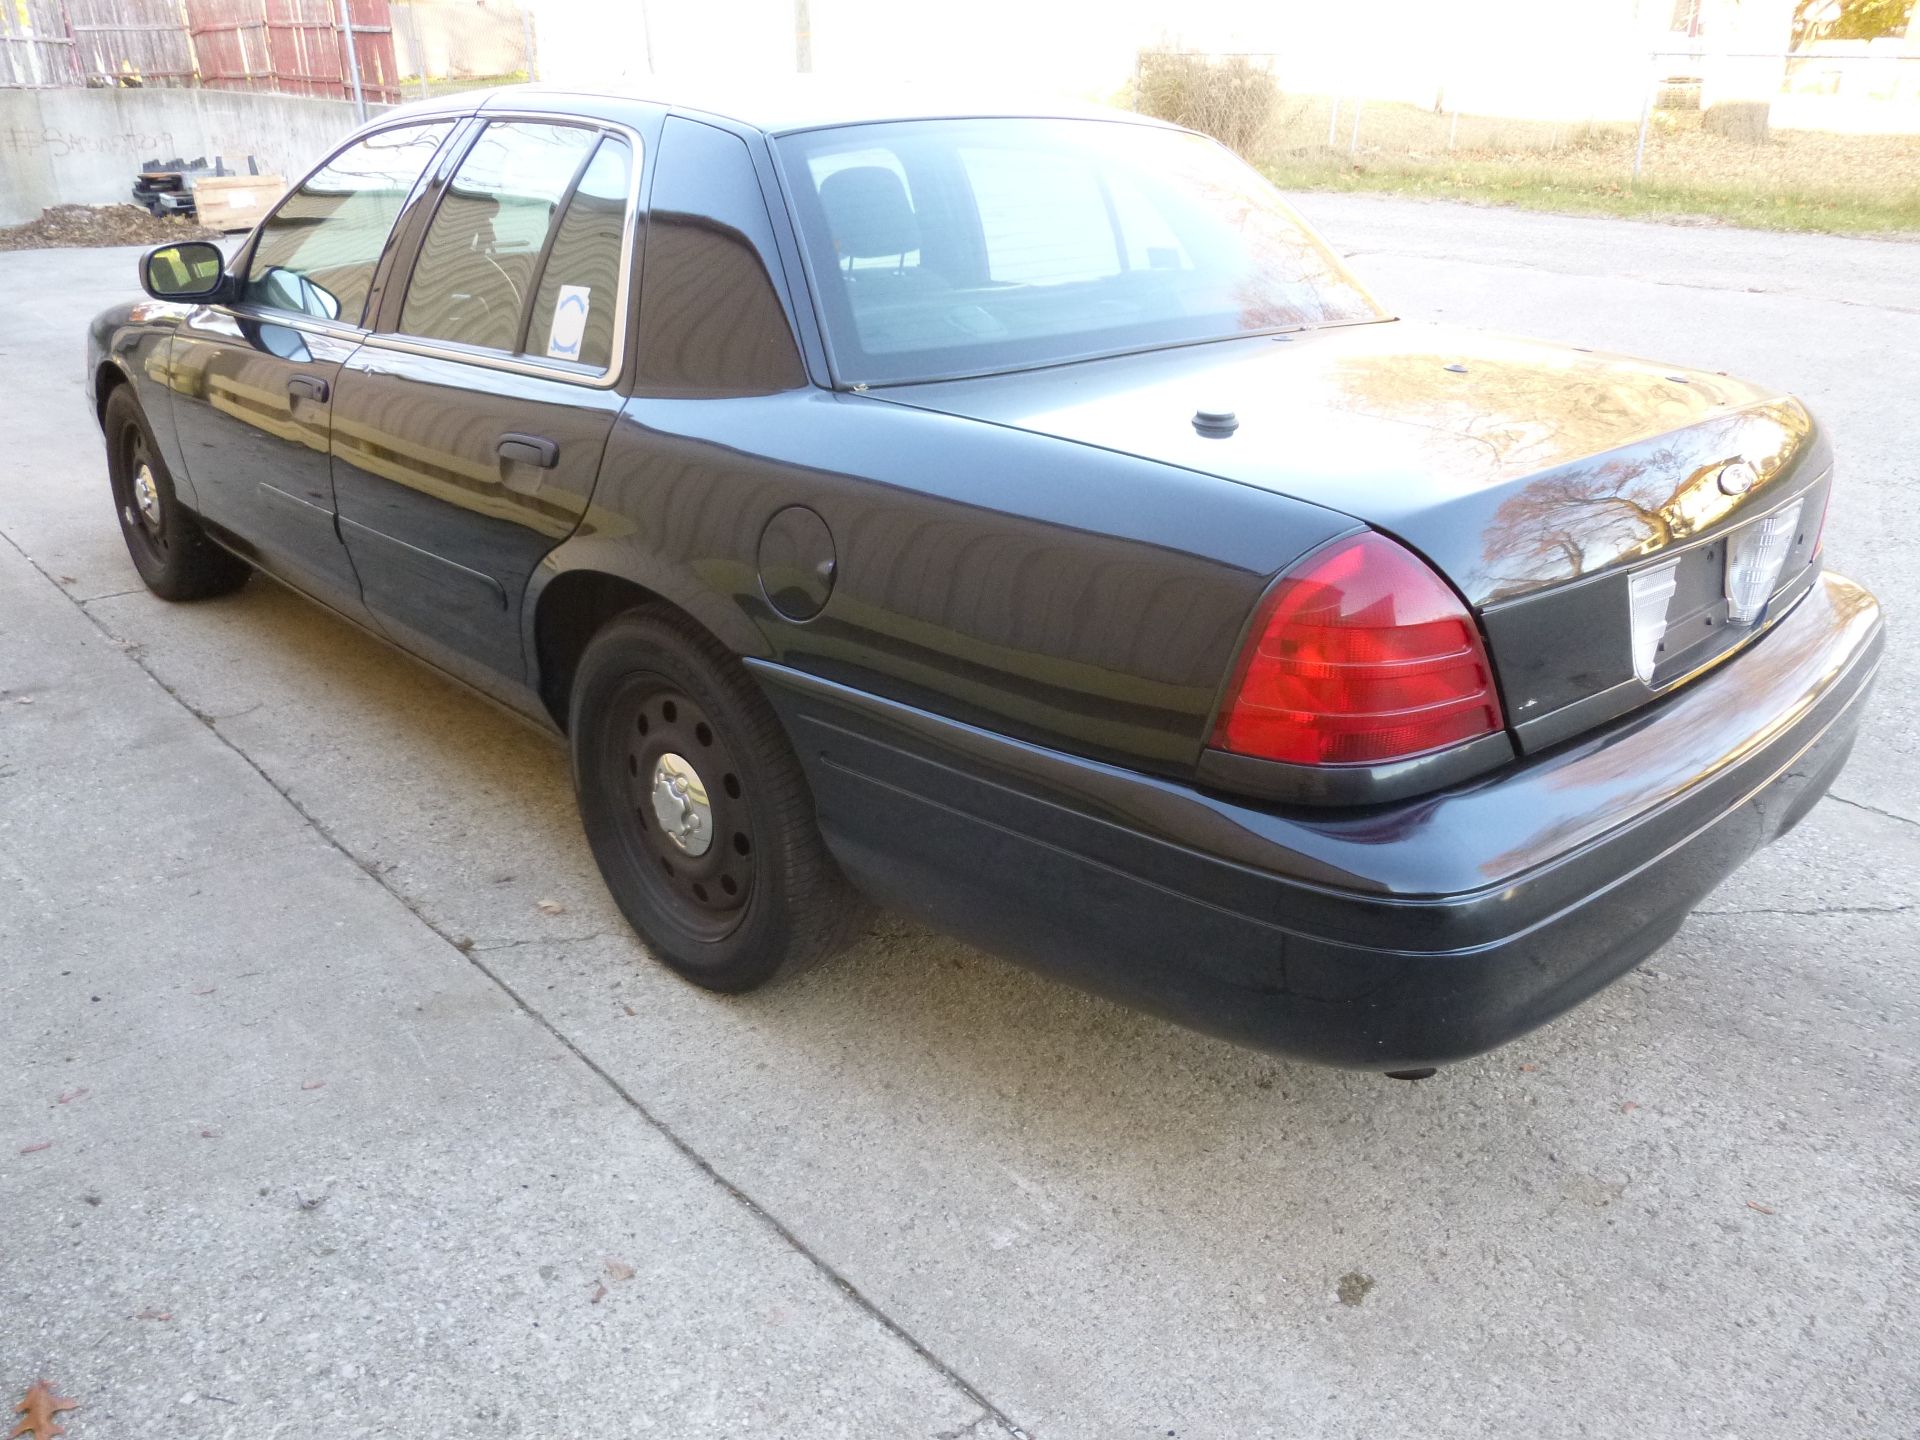 2008 Ford Crown Victoria 2FAFP71V18X176728 police interceptor 129,570 miles displayed Municipally - Image 6 of 14